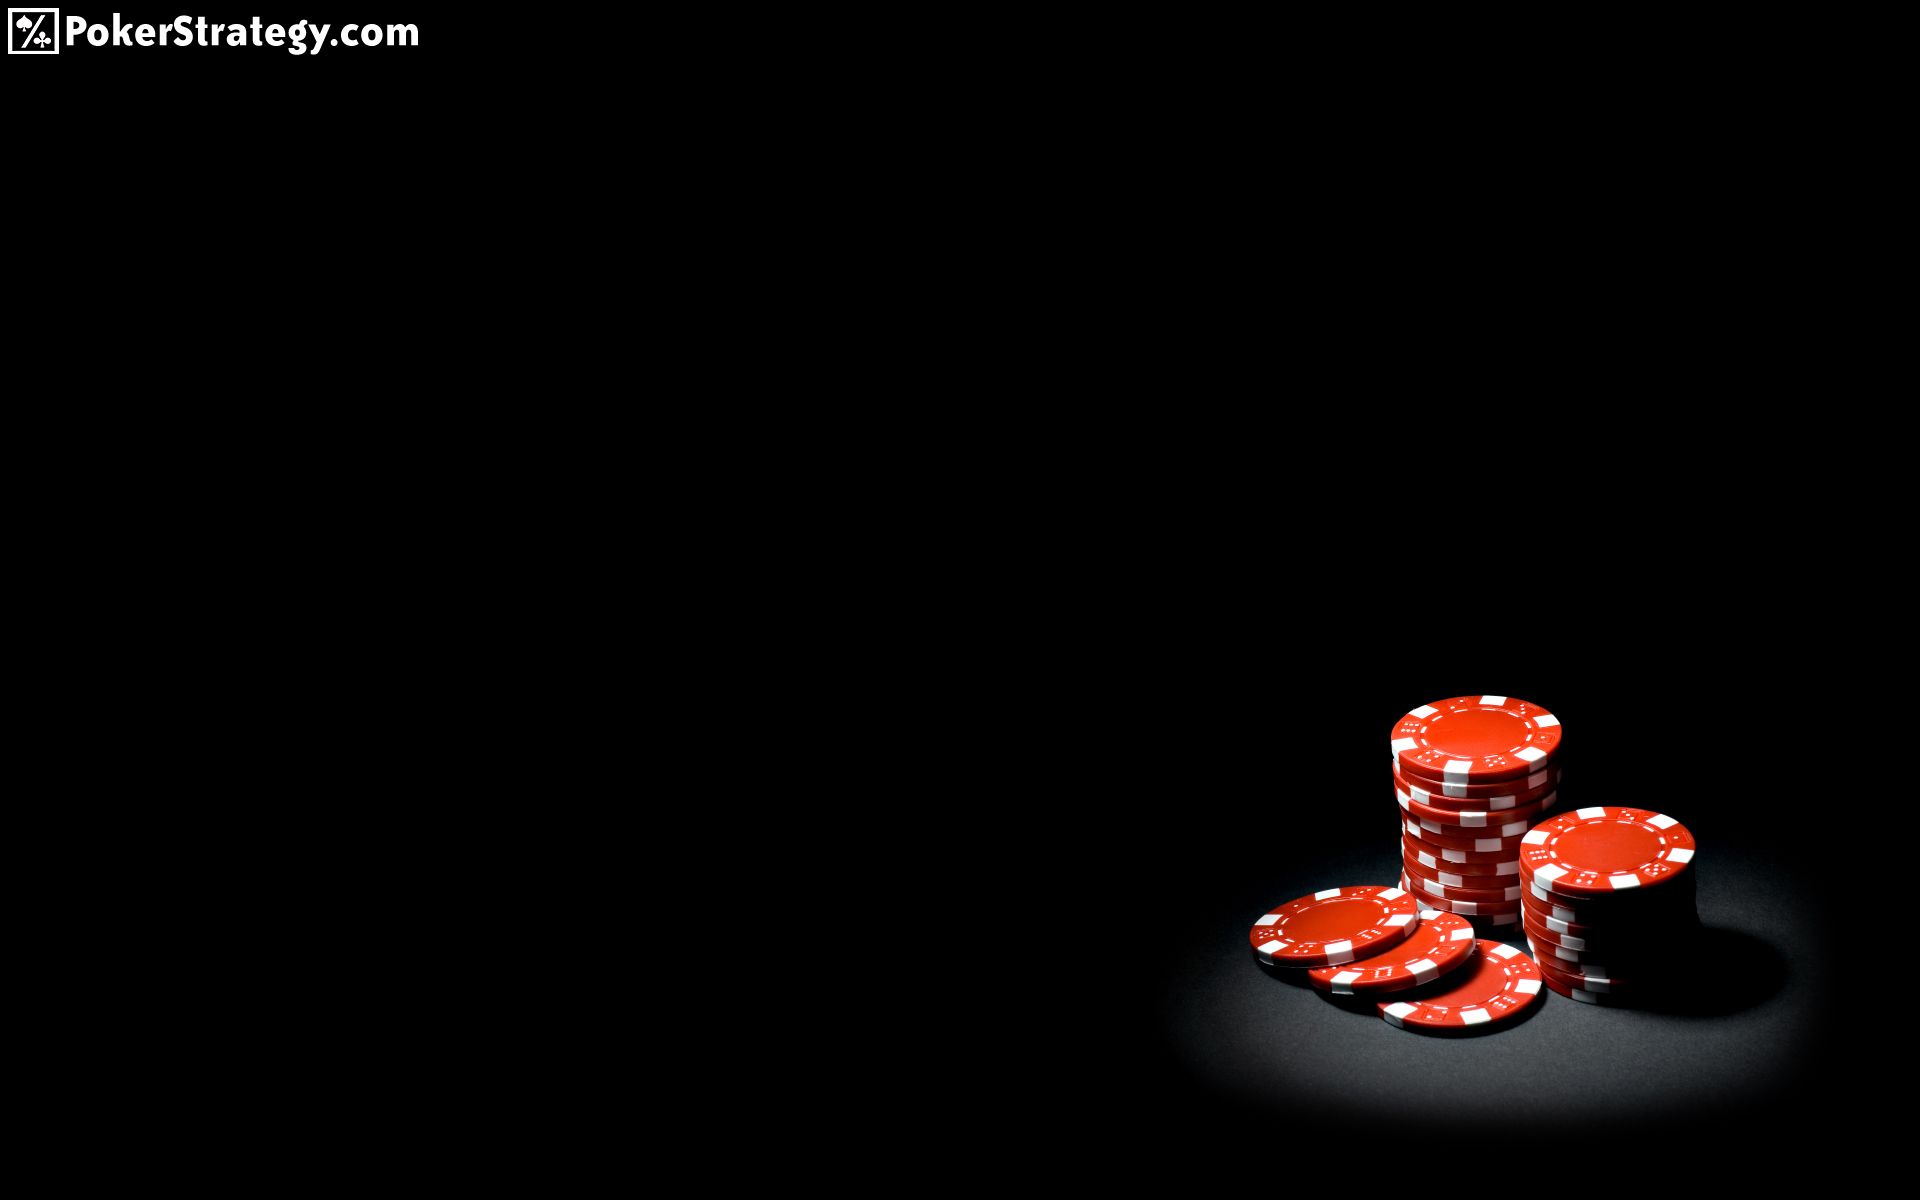 How To Find Gambling Online